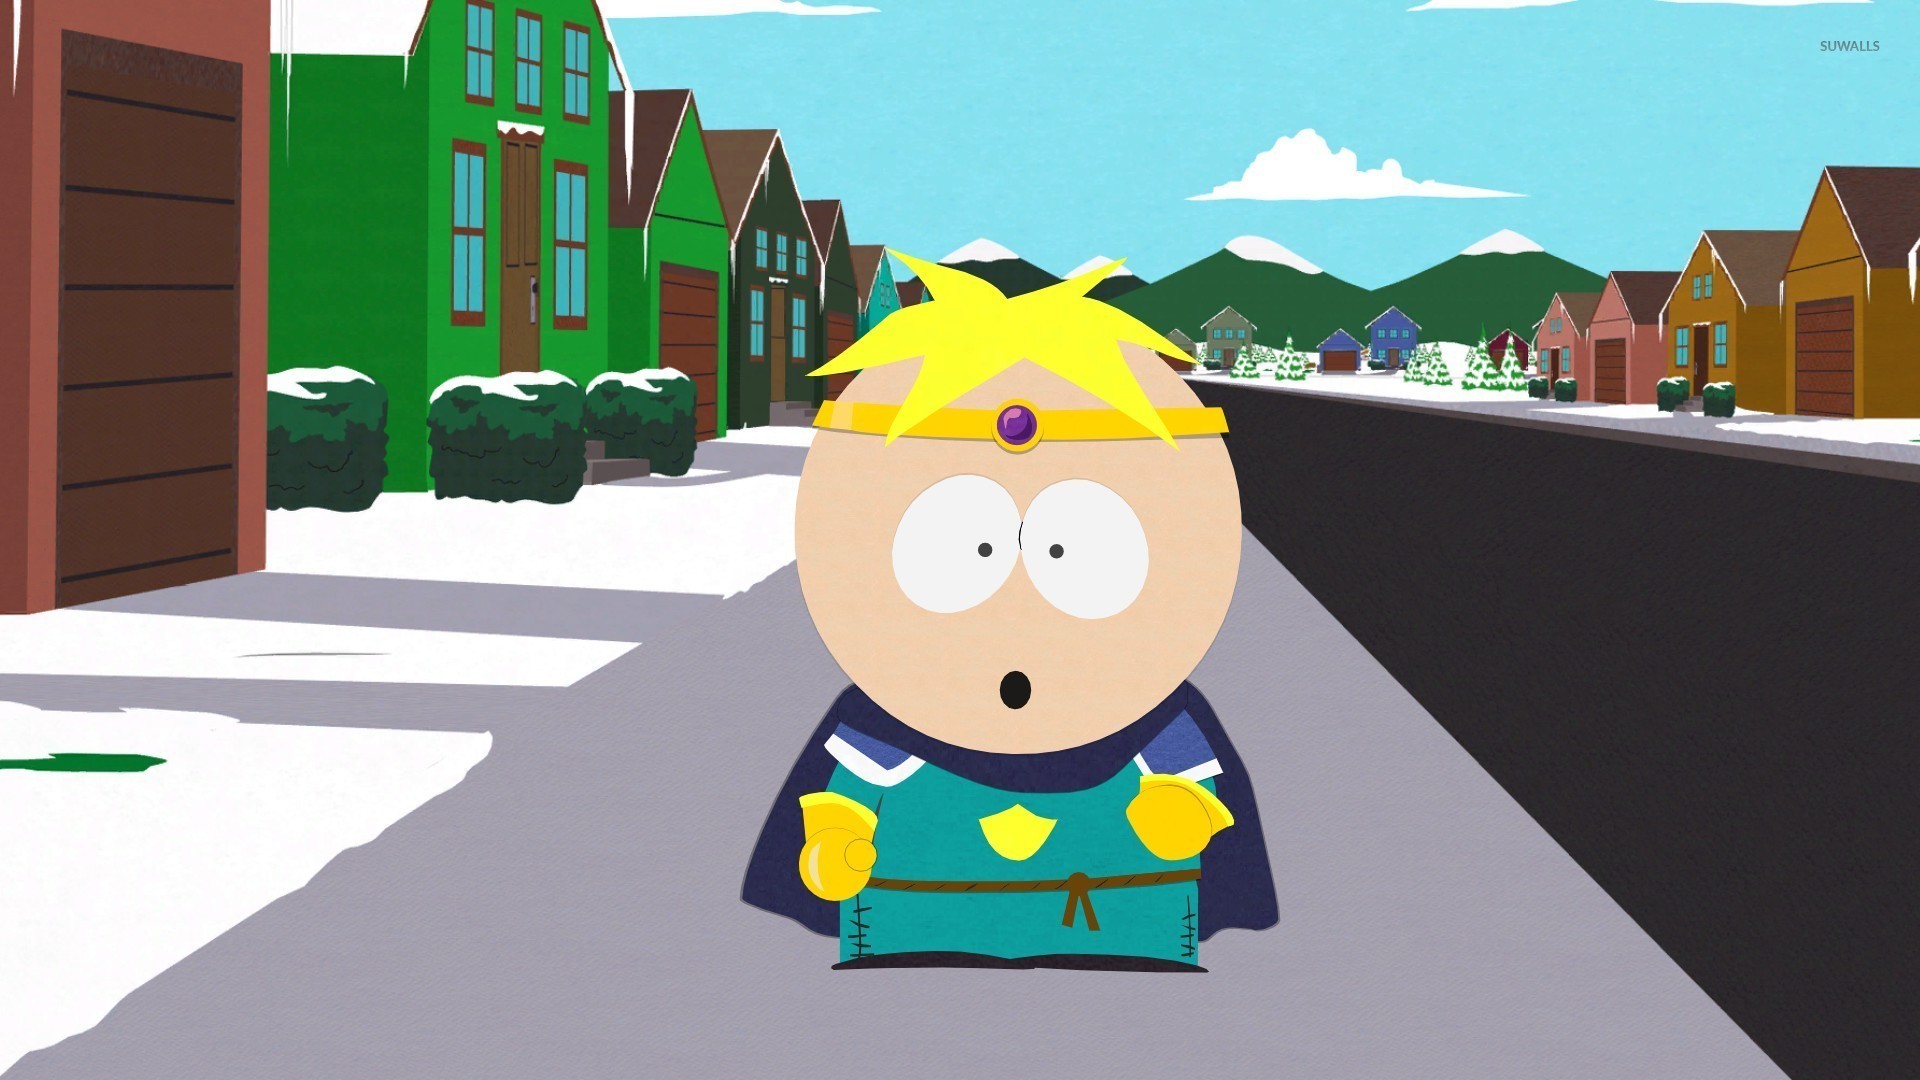 1920x1080 South park Wallpapers HD, Desktop Backgrounds, Images and Pictures .